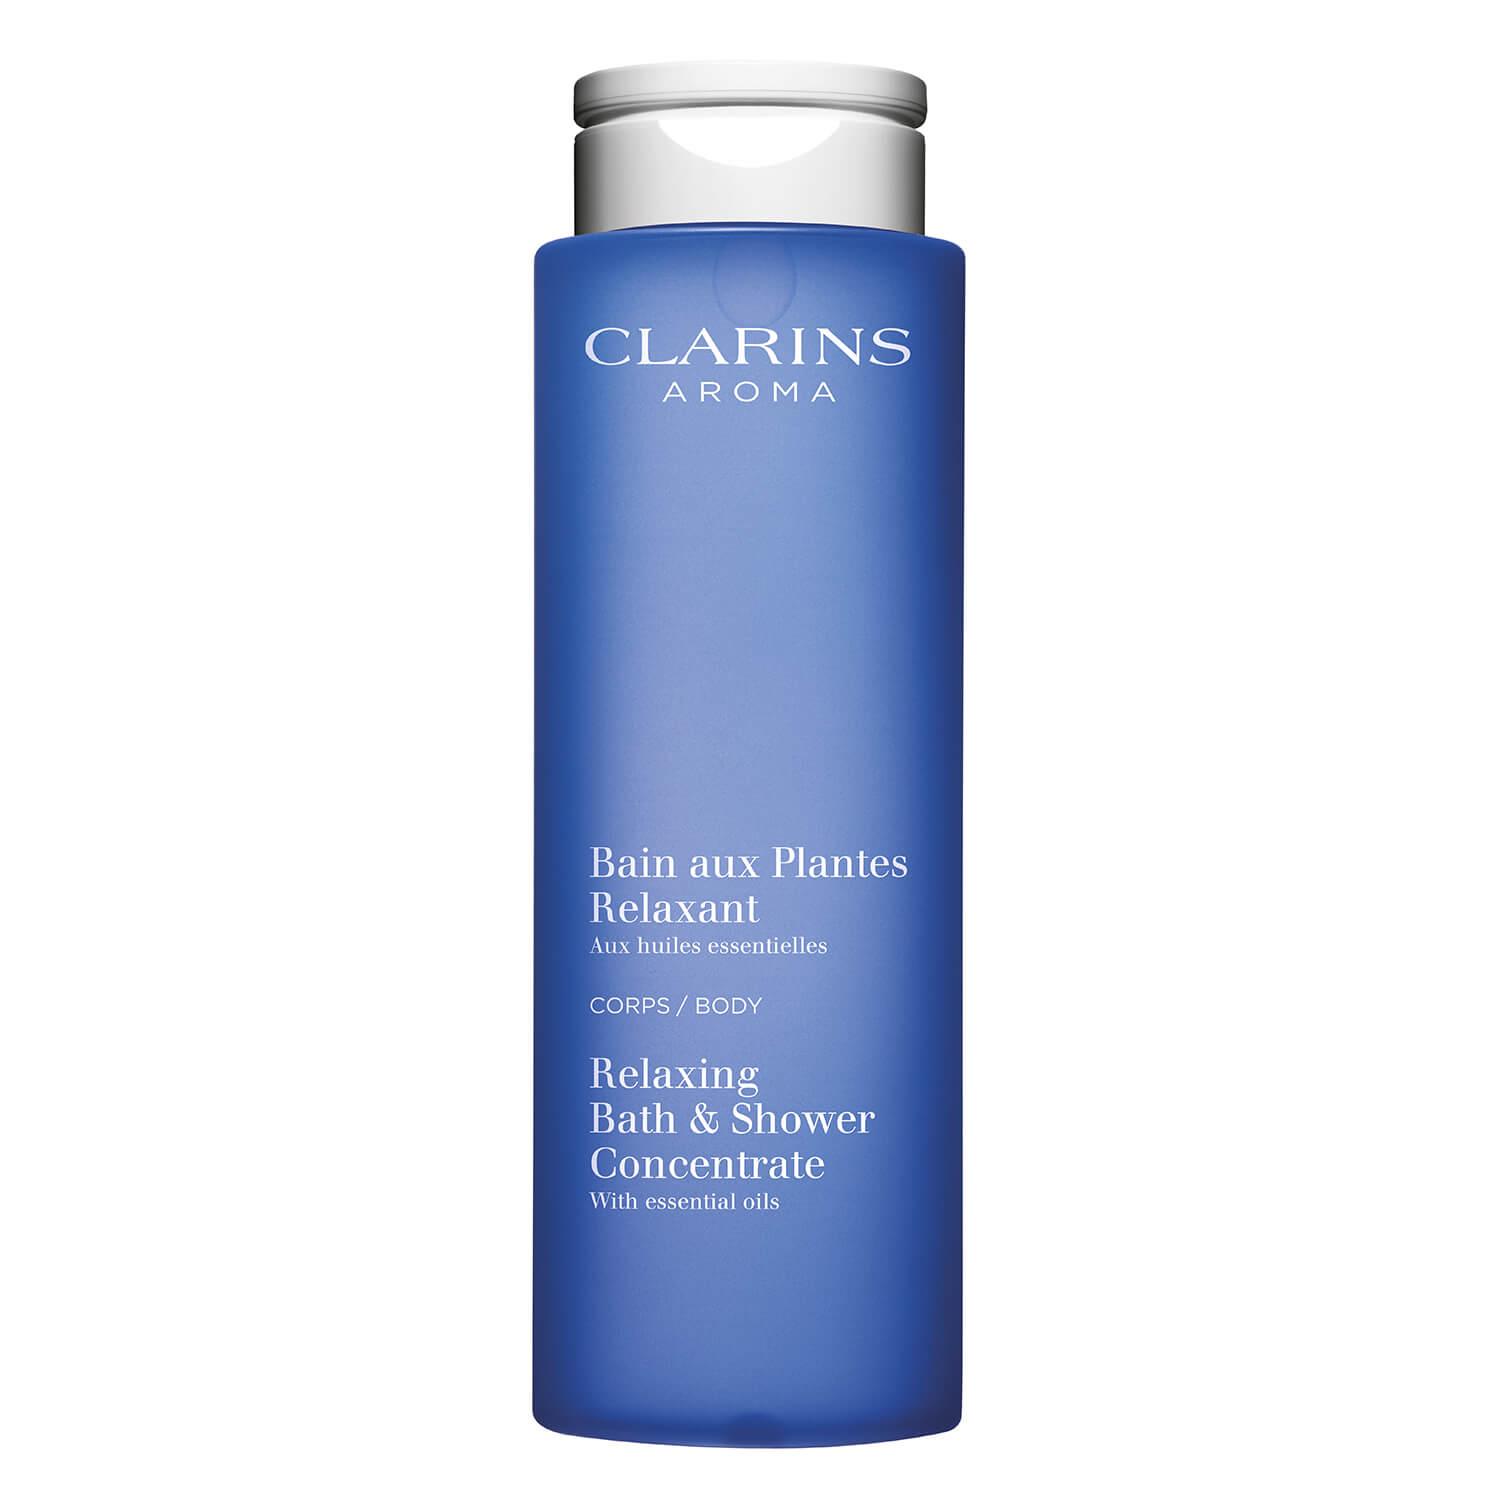 Clarins Body - Relaxing Bath & Shower Concentrate